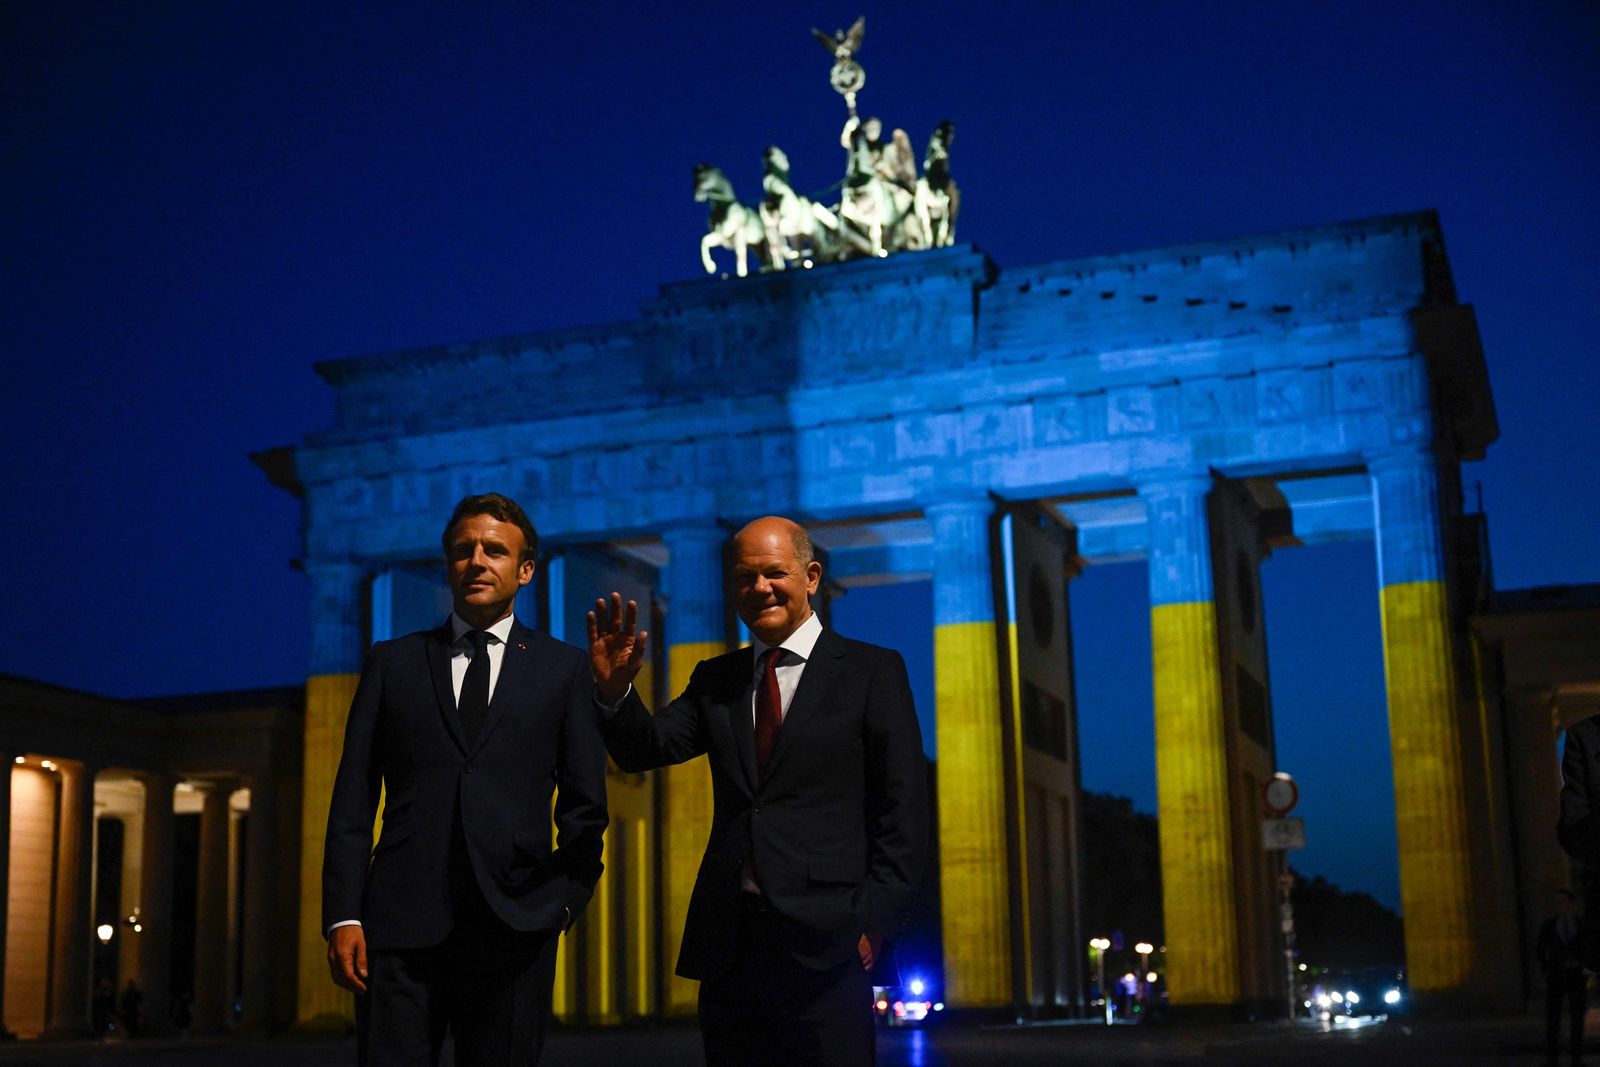 German Chancellor Olaf Scholz (R) and French President Emmanuel Macron visit the landmark Brandenburg Gate illuminated in the colors of the Ukrainian flag in Berlin on May 9, 2022, to show solidarity with Ukraine amid the ongoing Russian invasion. (Photo by John MACDOUGALL / AFP) - AFP